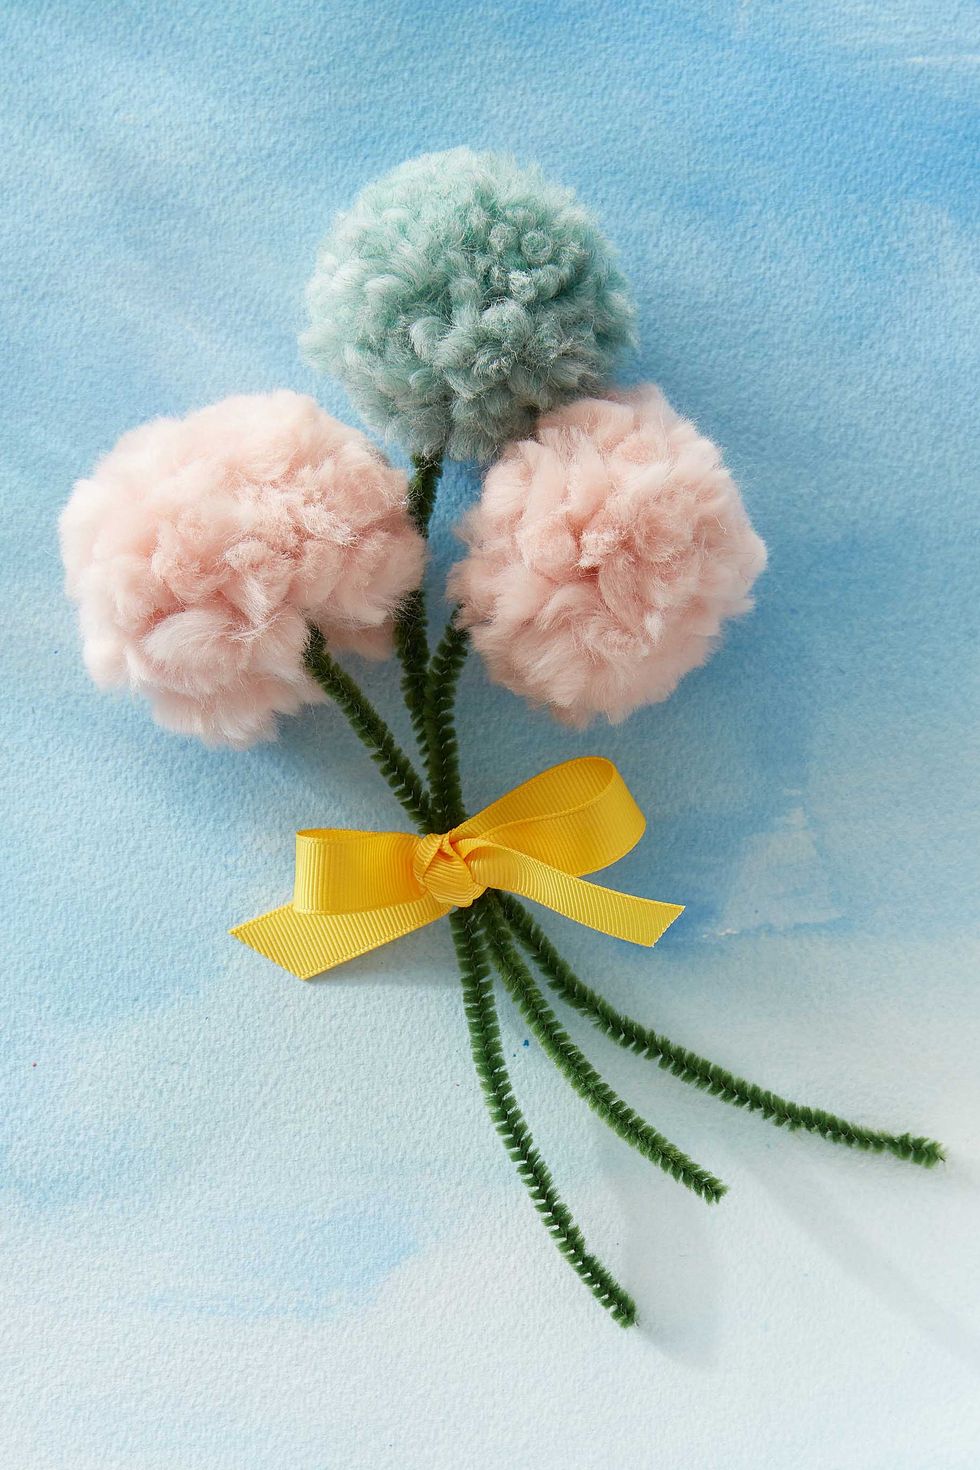 12 crafts ideas for Mother's Day 2022